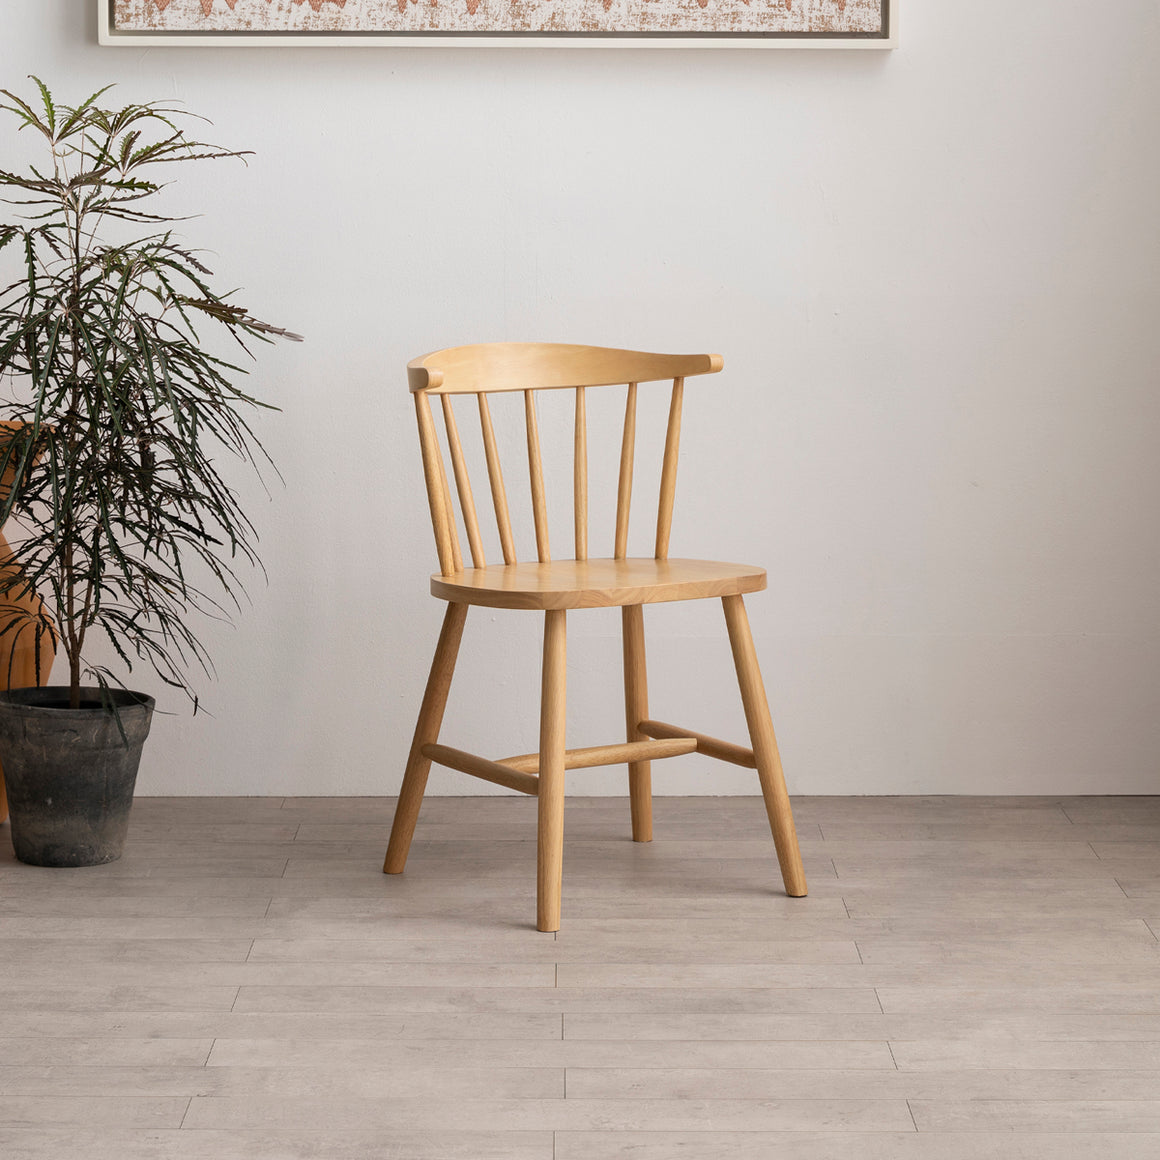 New Windsor Chair (accept pre-order)